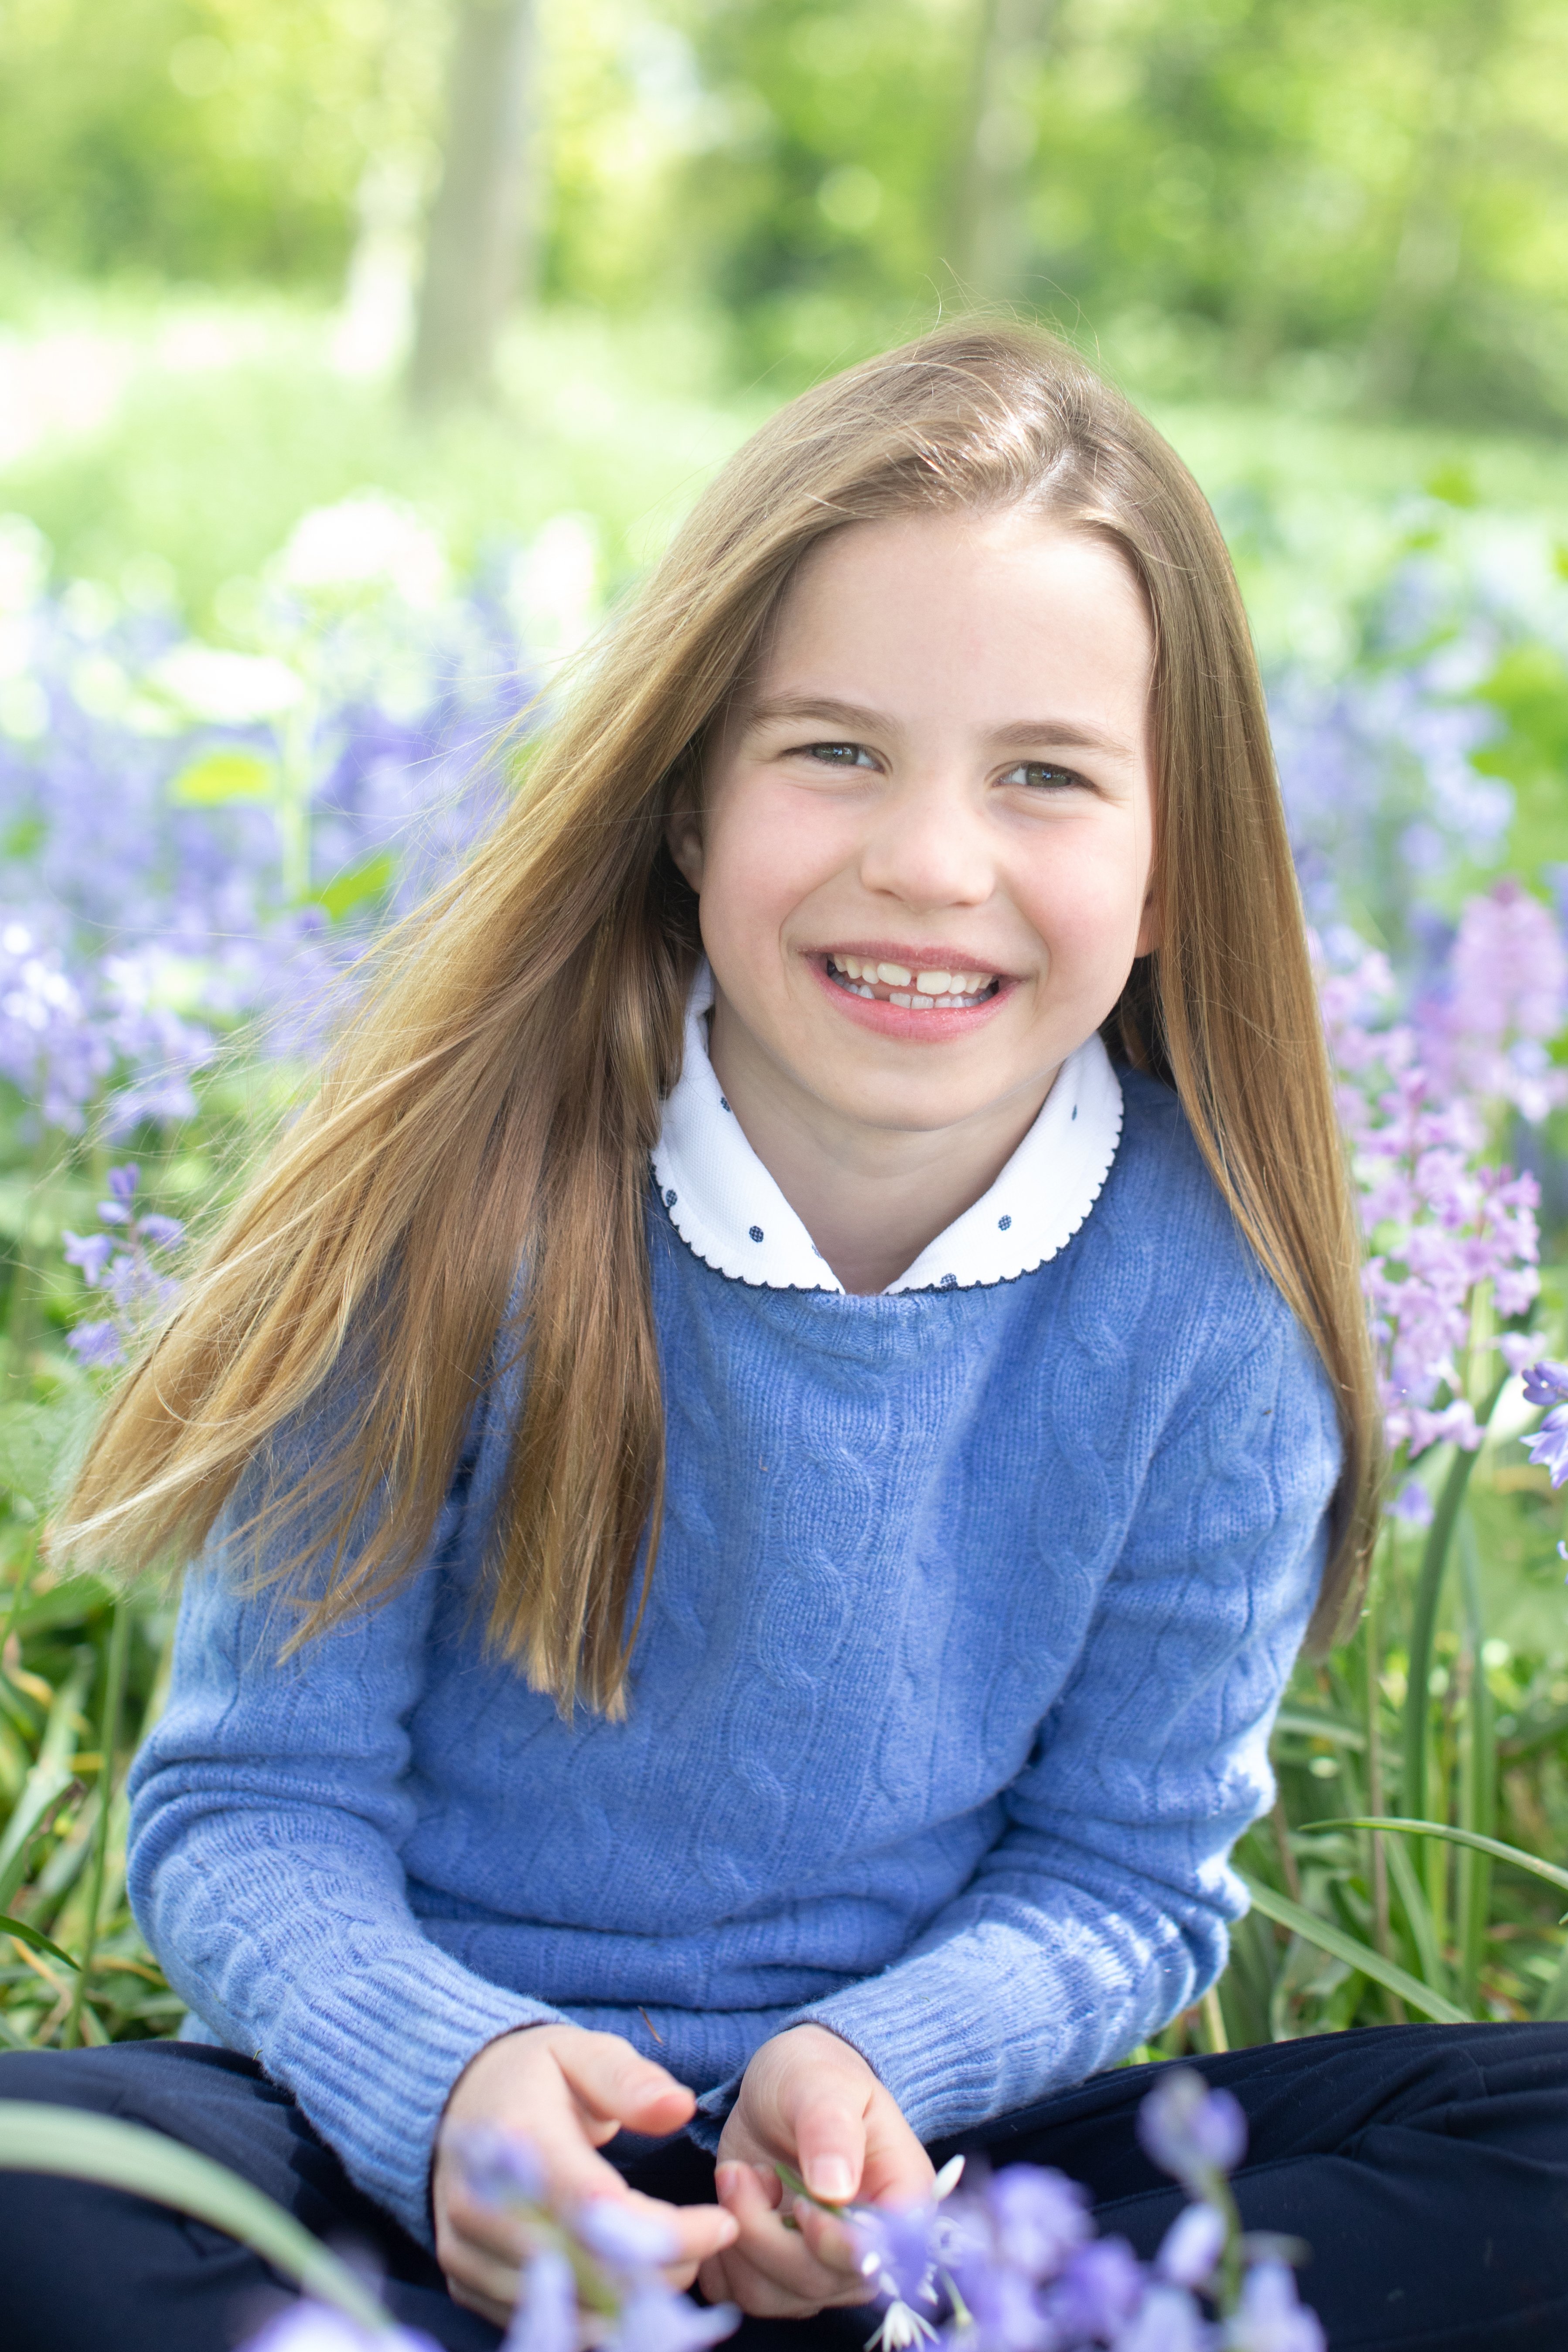 Portrait of Princess Charlotte to celebrate her 7th birthday | Source: Getty Images